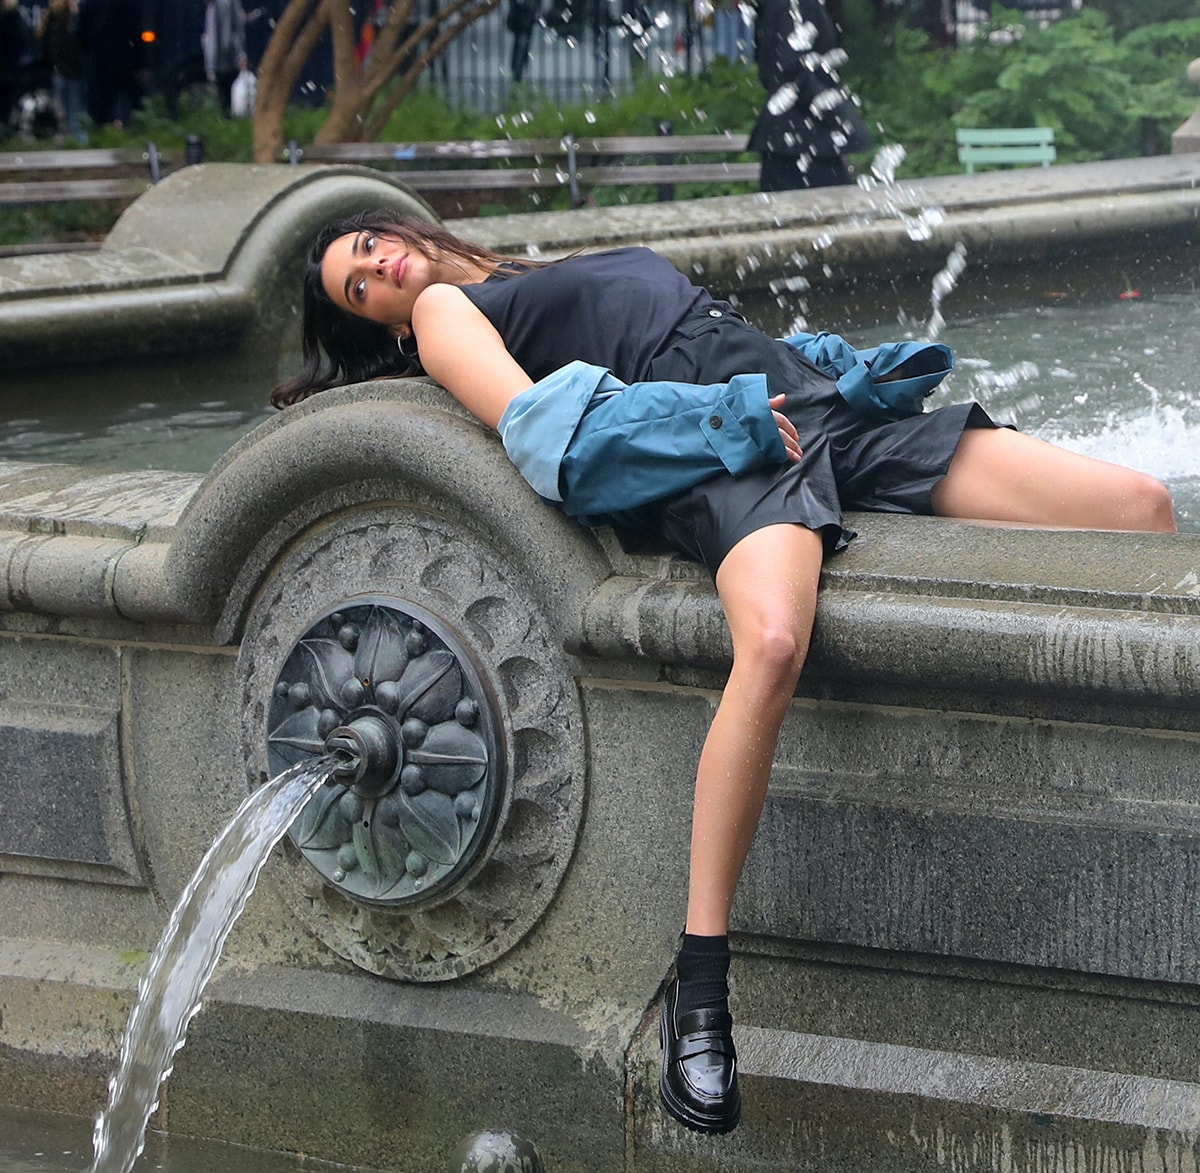 Kendall Jenner leans on the edge of a public fountain in wet clothes that included a pair of black shorts, a tank top, and a pale blue coat